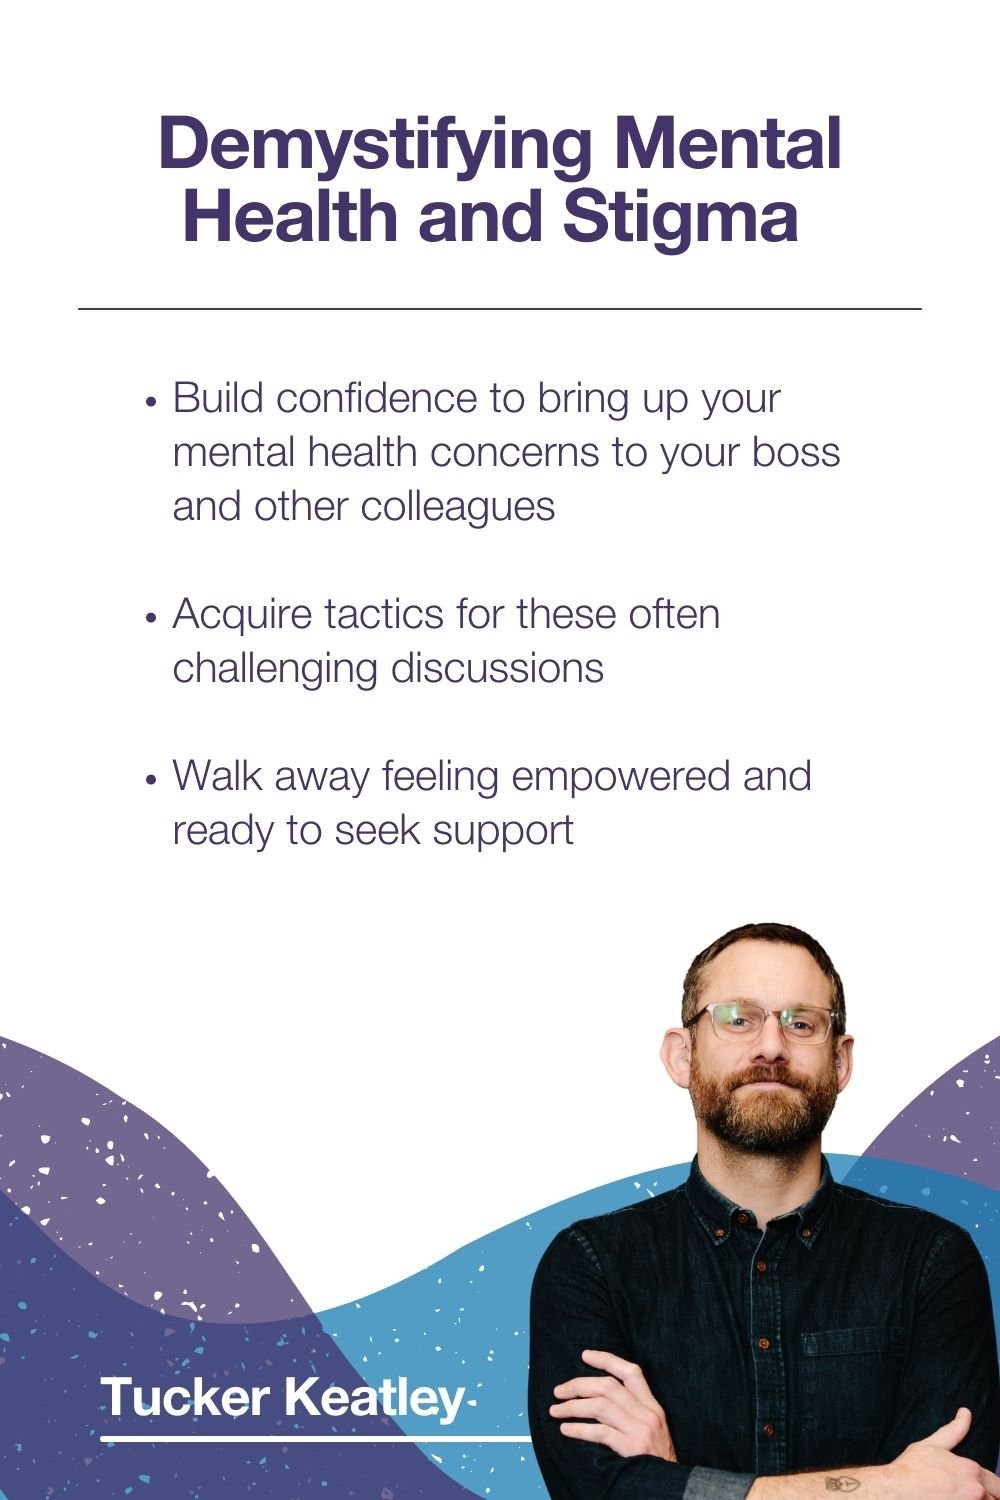 What to do if you're concerned about a colleague's wellbeing